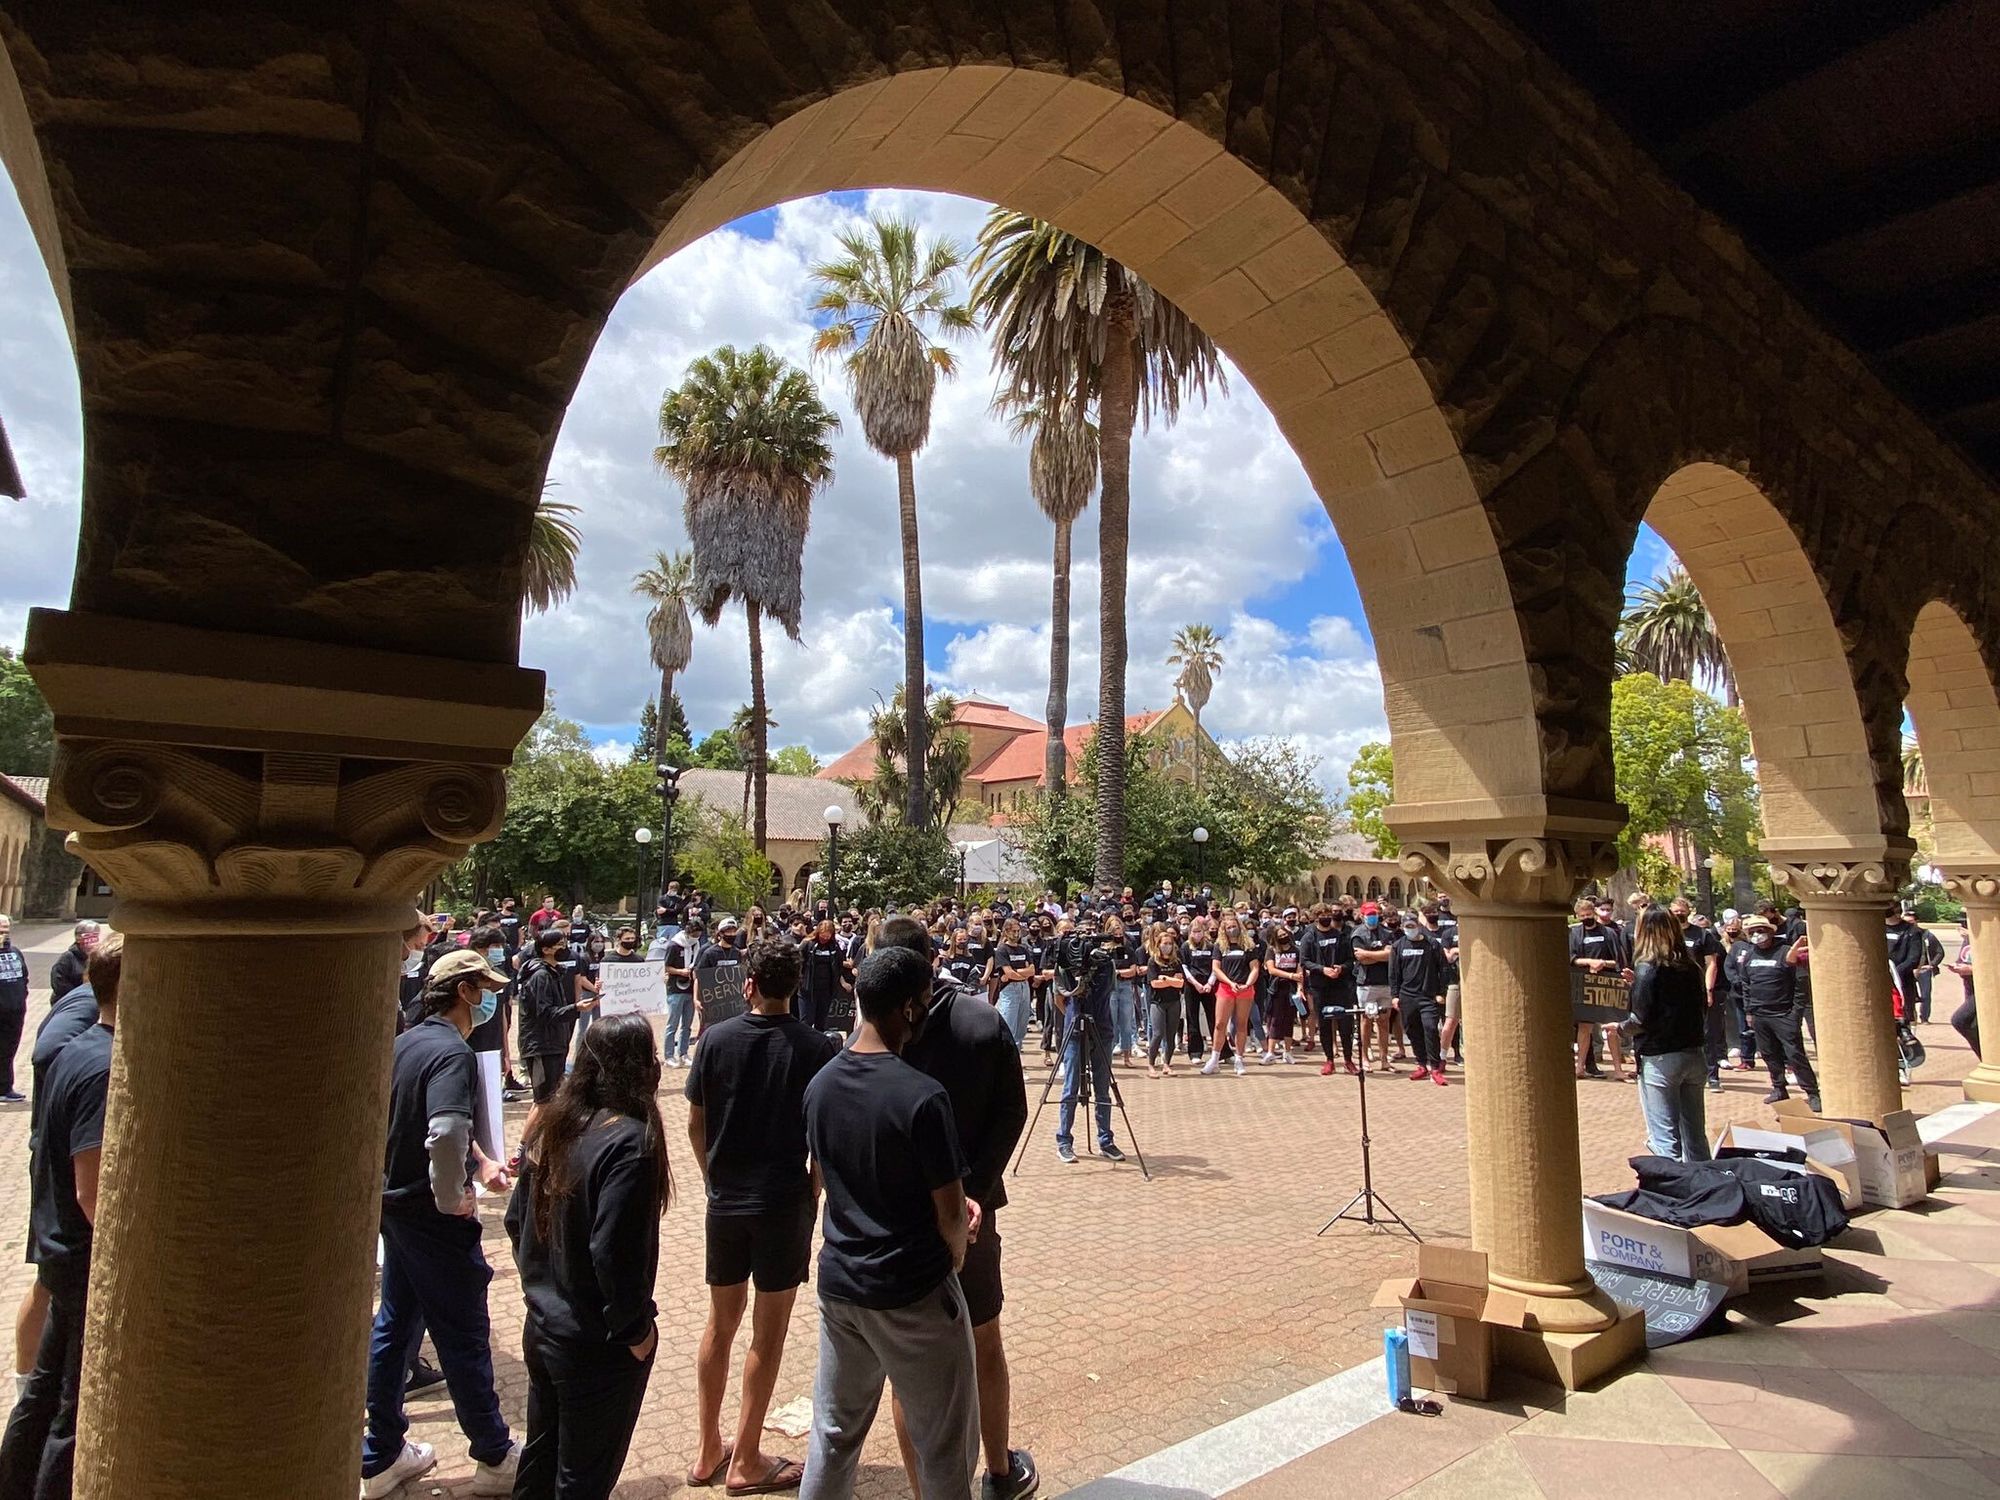 "You can't cut me" - Stanford athletes and supporters rally to save athletic teams